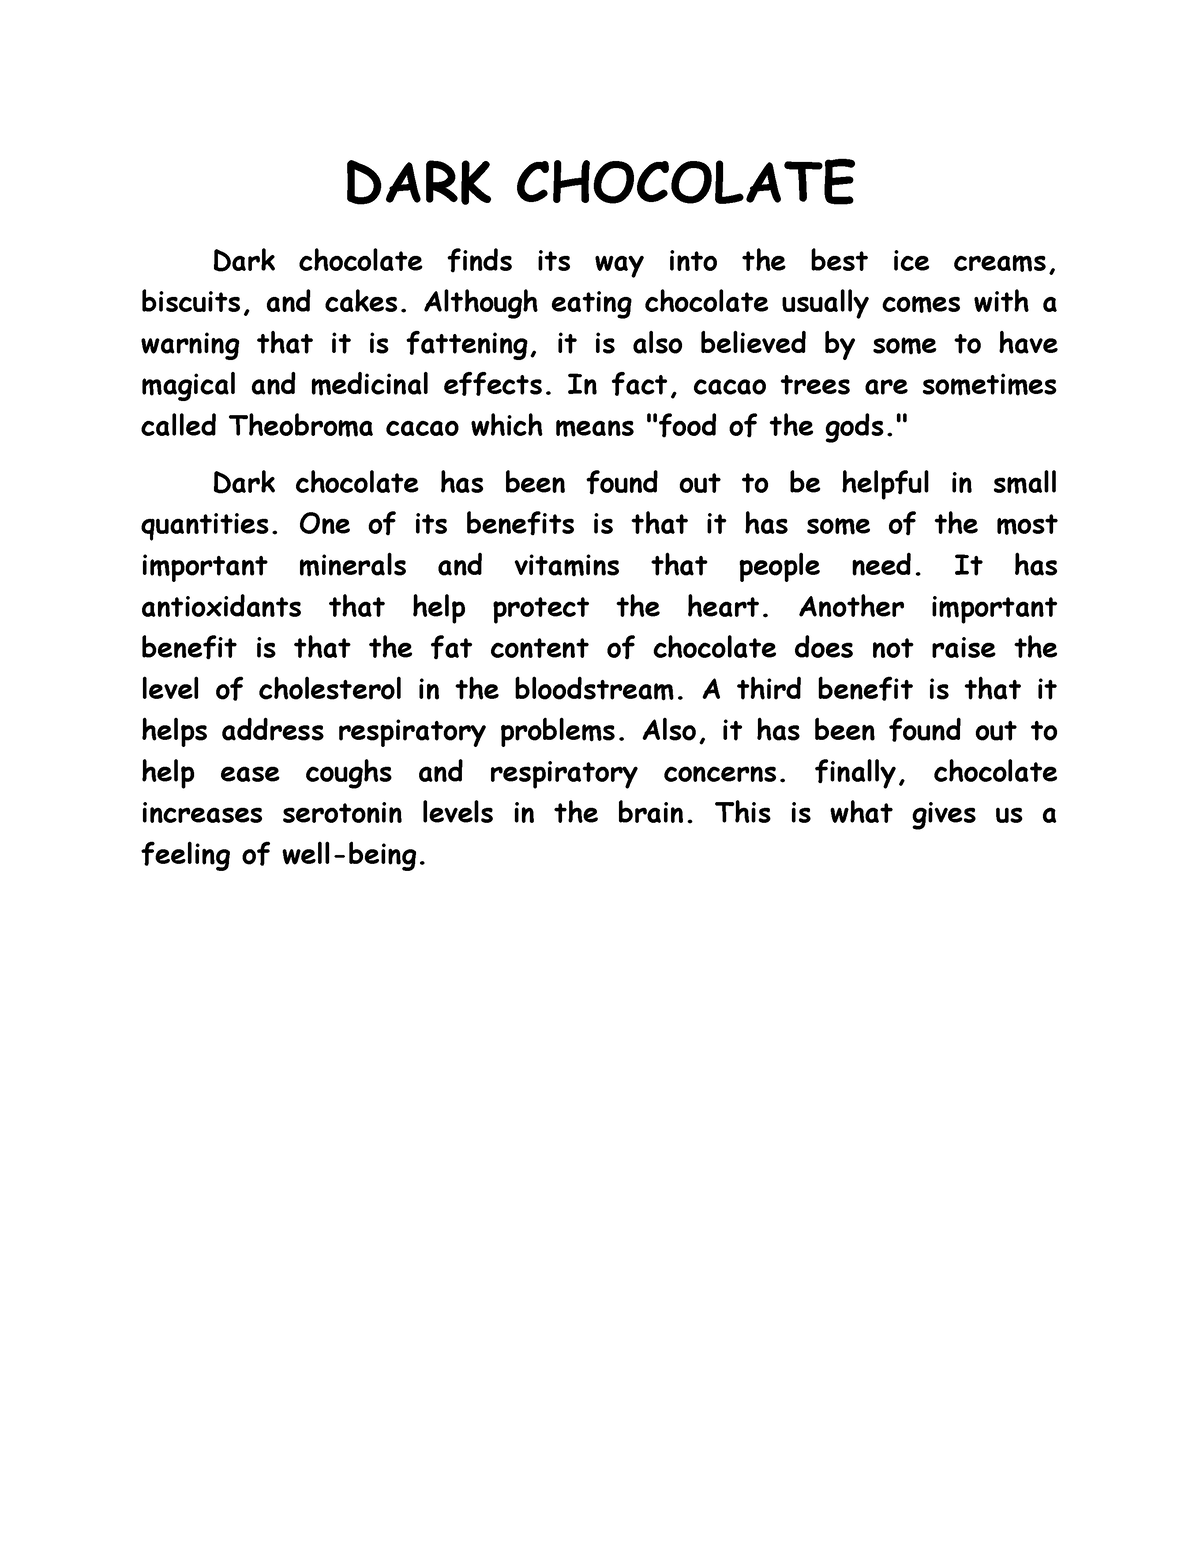 GST Grade 7-DARK Chocolate - DARK CHOCOLATE Dark chocolate finds its ...